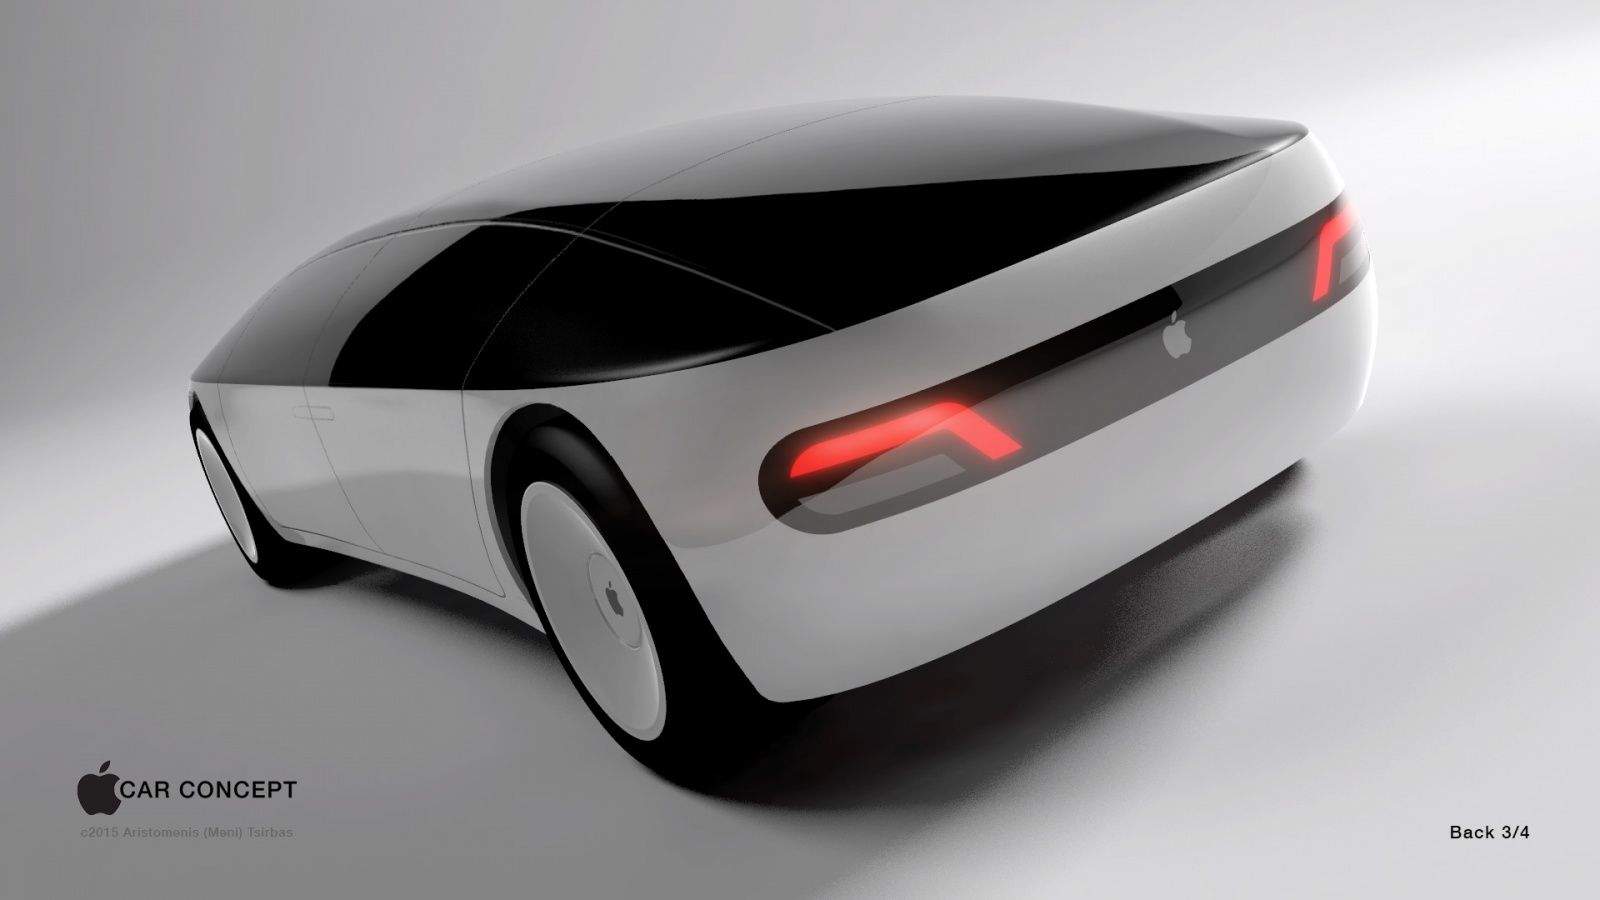 The Apple Car looks more likely as Cupertino hires new execs